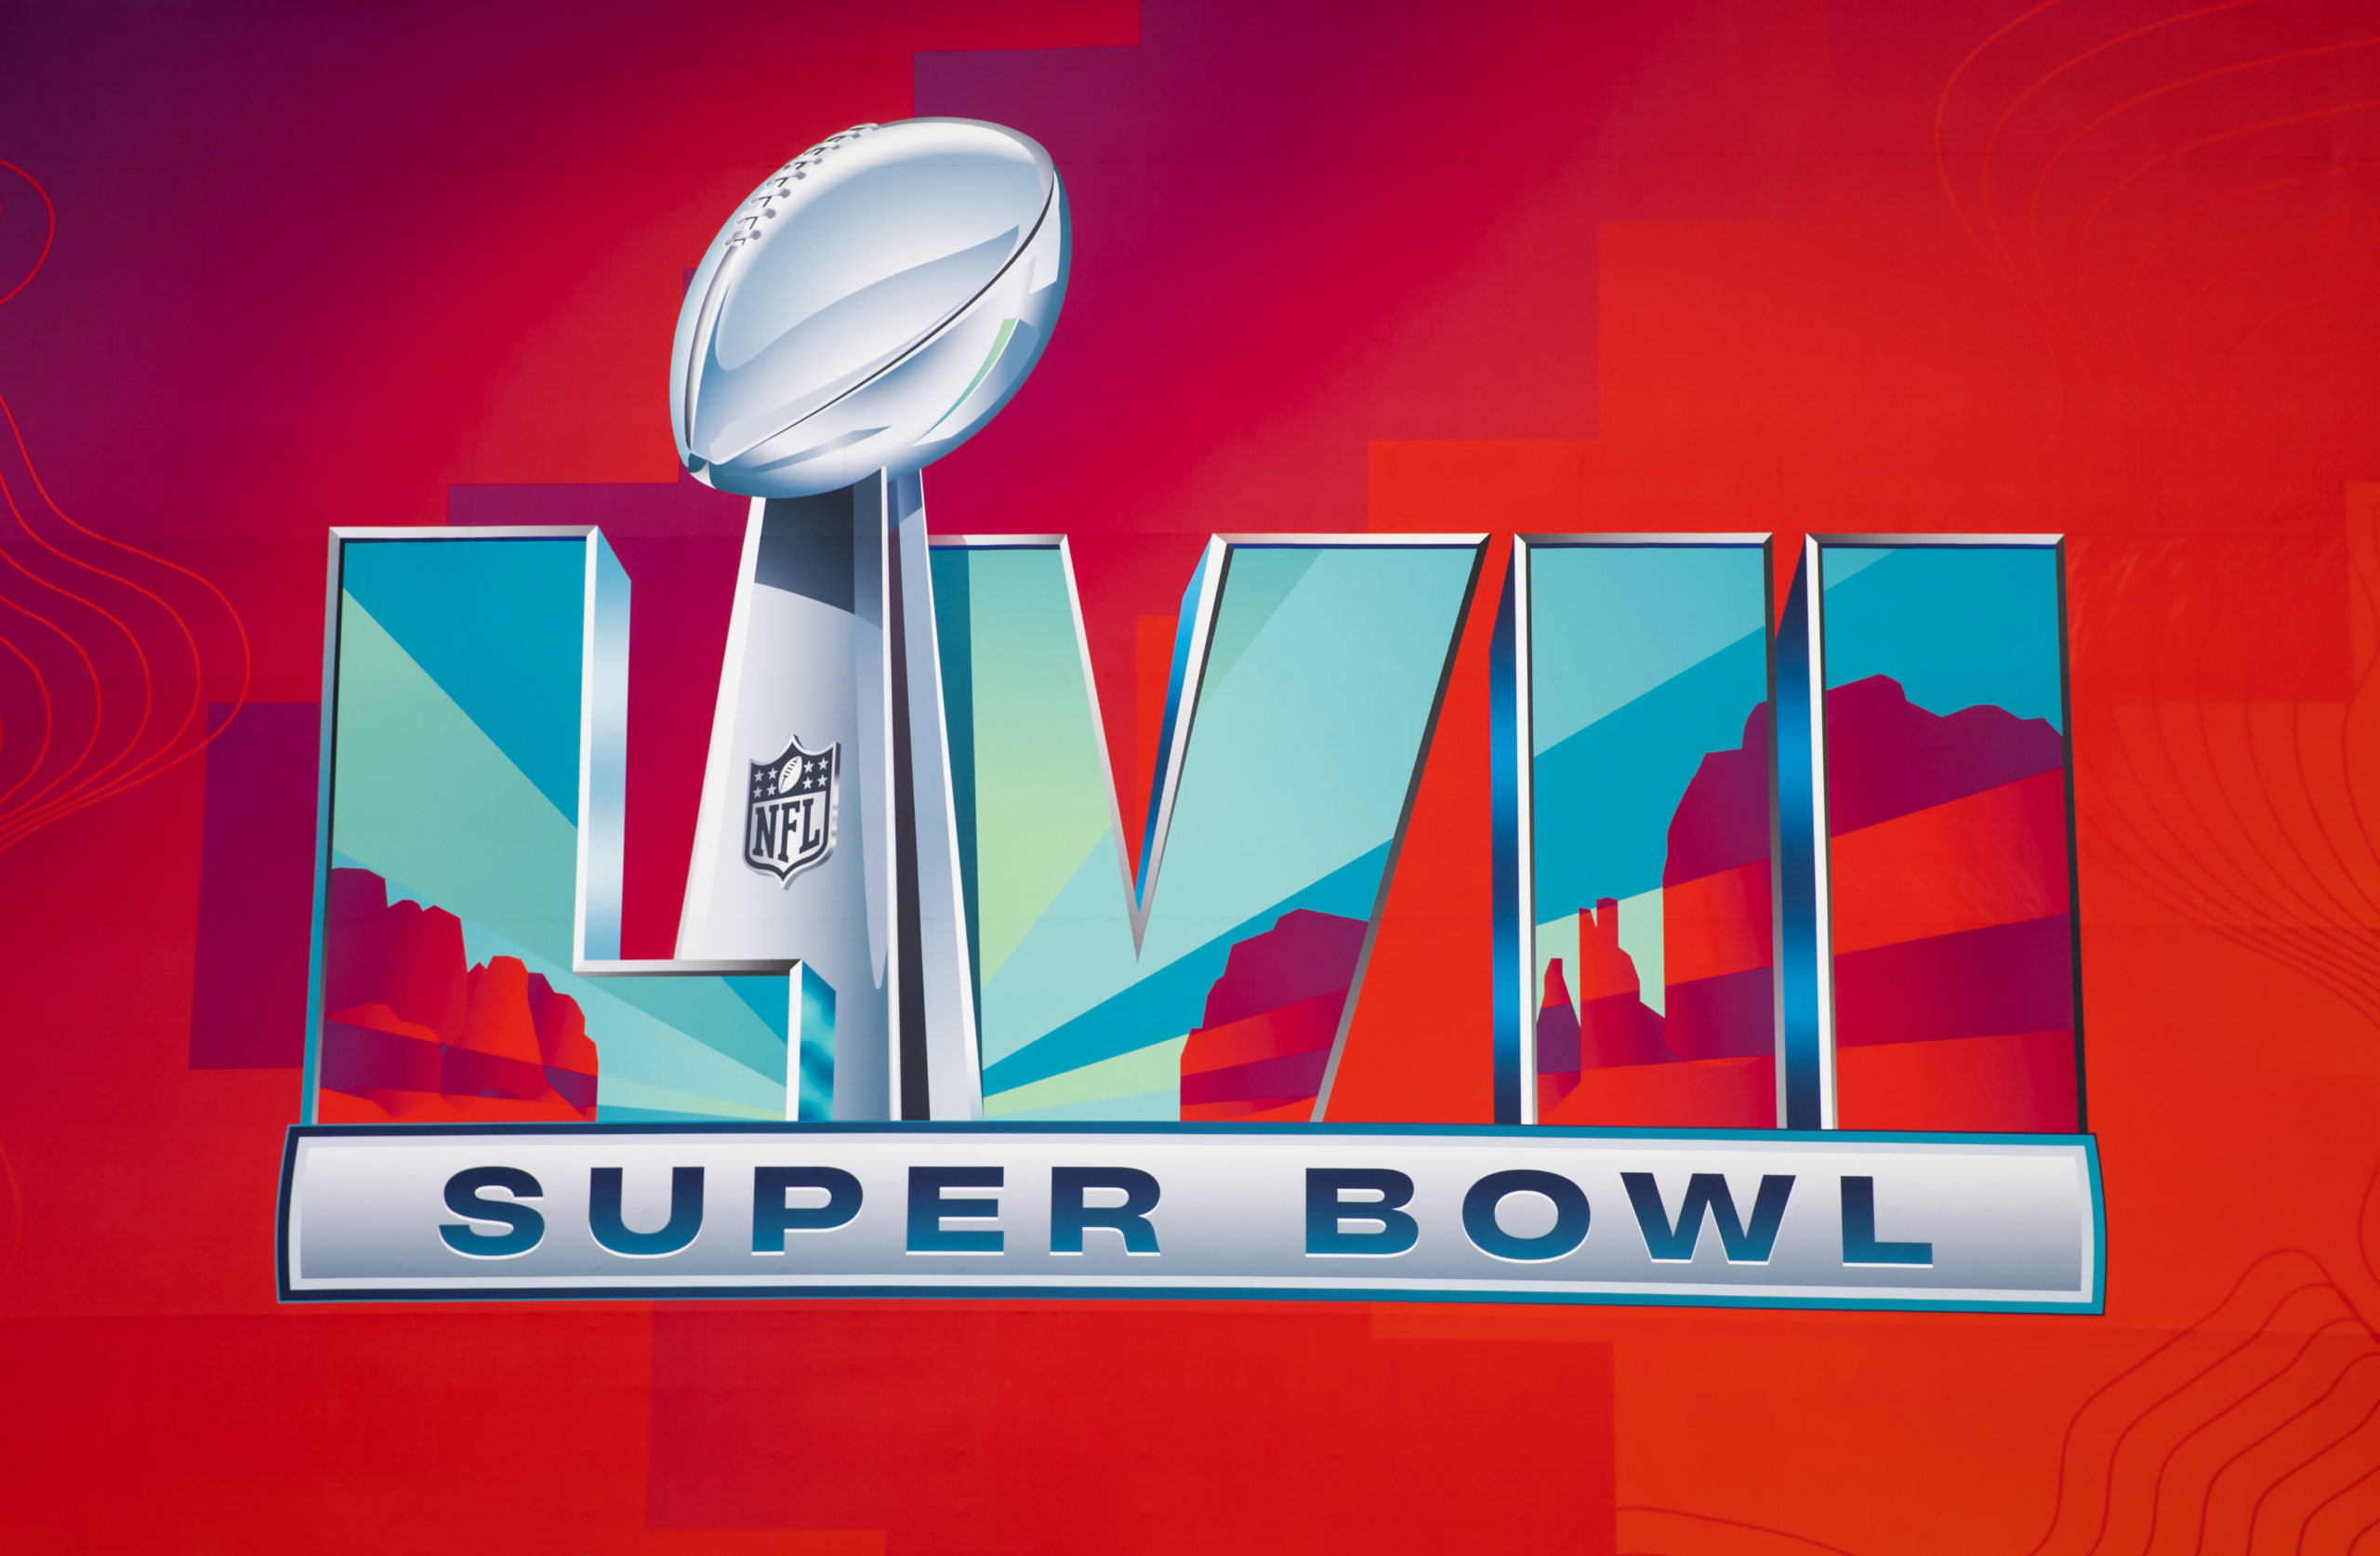 what time do the super bowl start 2022